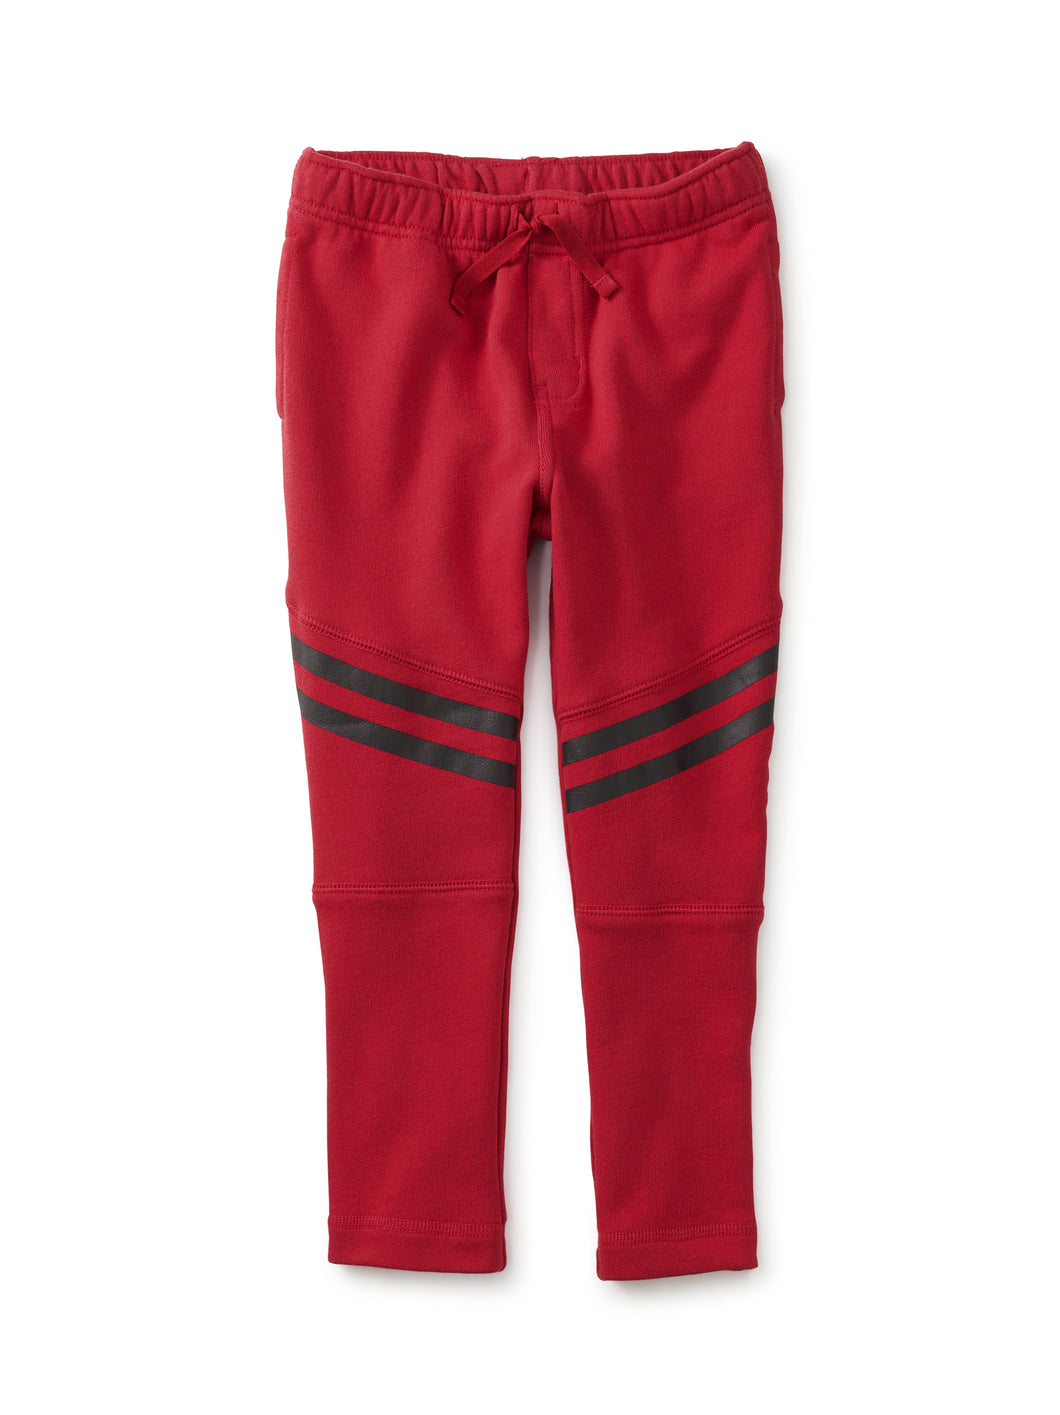 Tea Collection Speedy Striped Joggers - Red Wagon